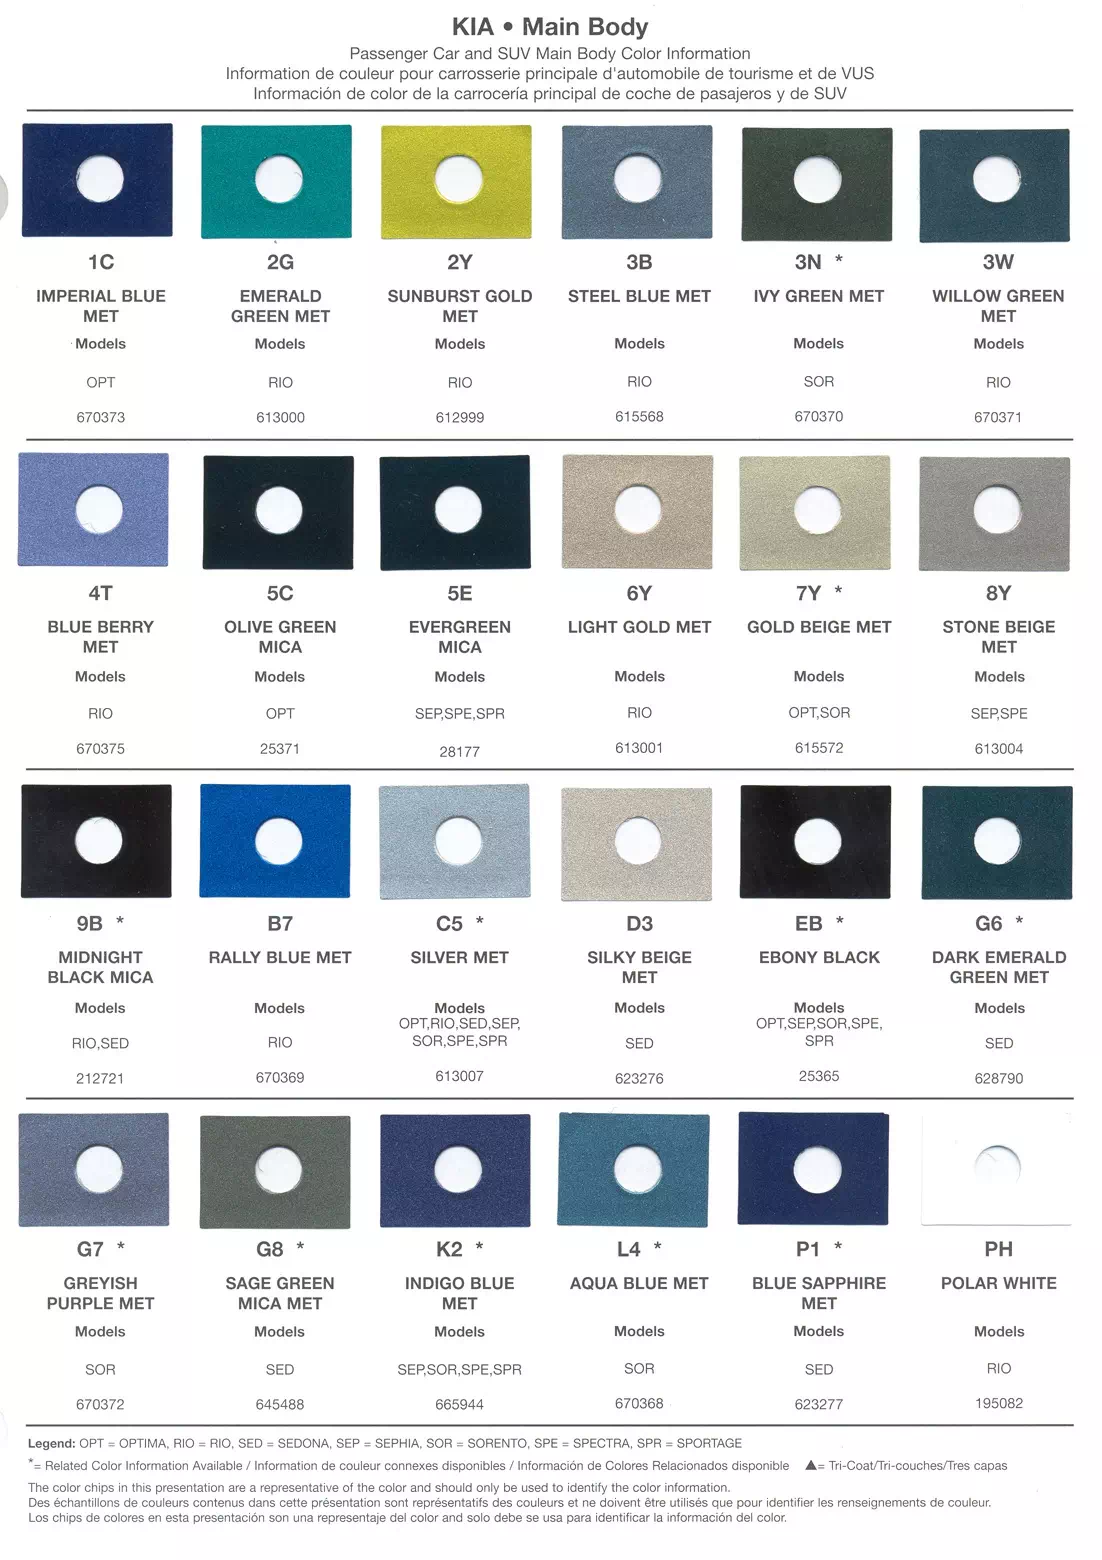 Exterior Paint Colors for Kia Vehicles in 2003